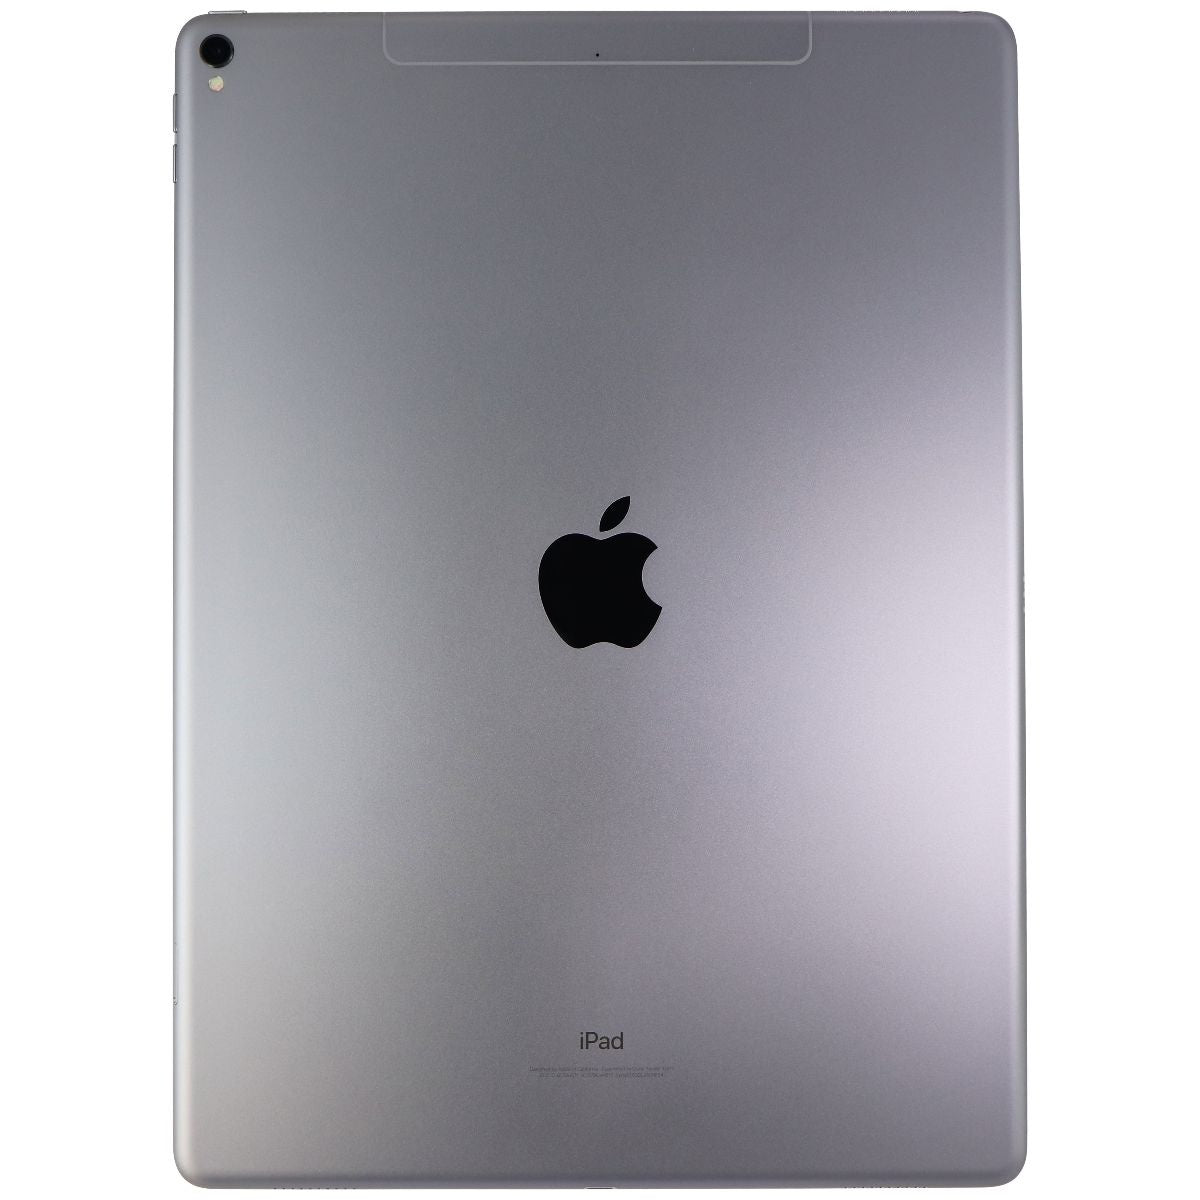 Apple iPad Pro 12.9-inch (2nd Gen) Tablet (A1671) Unlocked - 256GB/Space Gray iPads, Tablets & eBook Readers Apple    - Simple Cell Bulk Wholesale Pricing - USA Seller